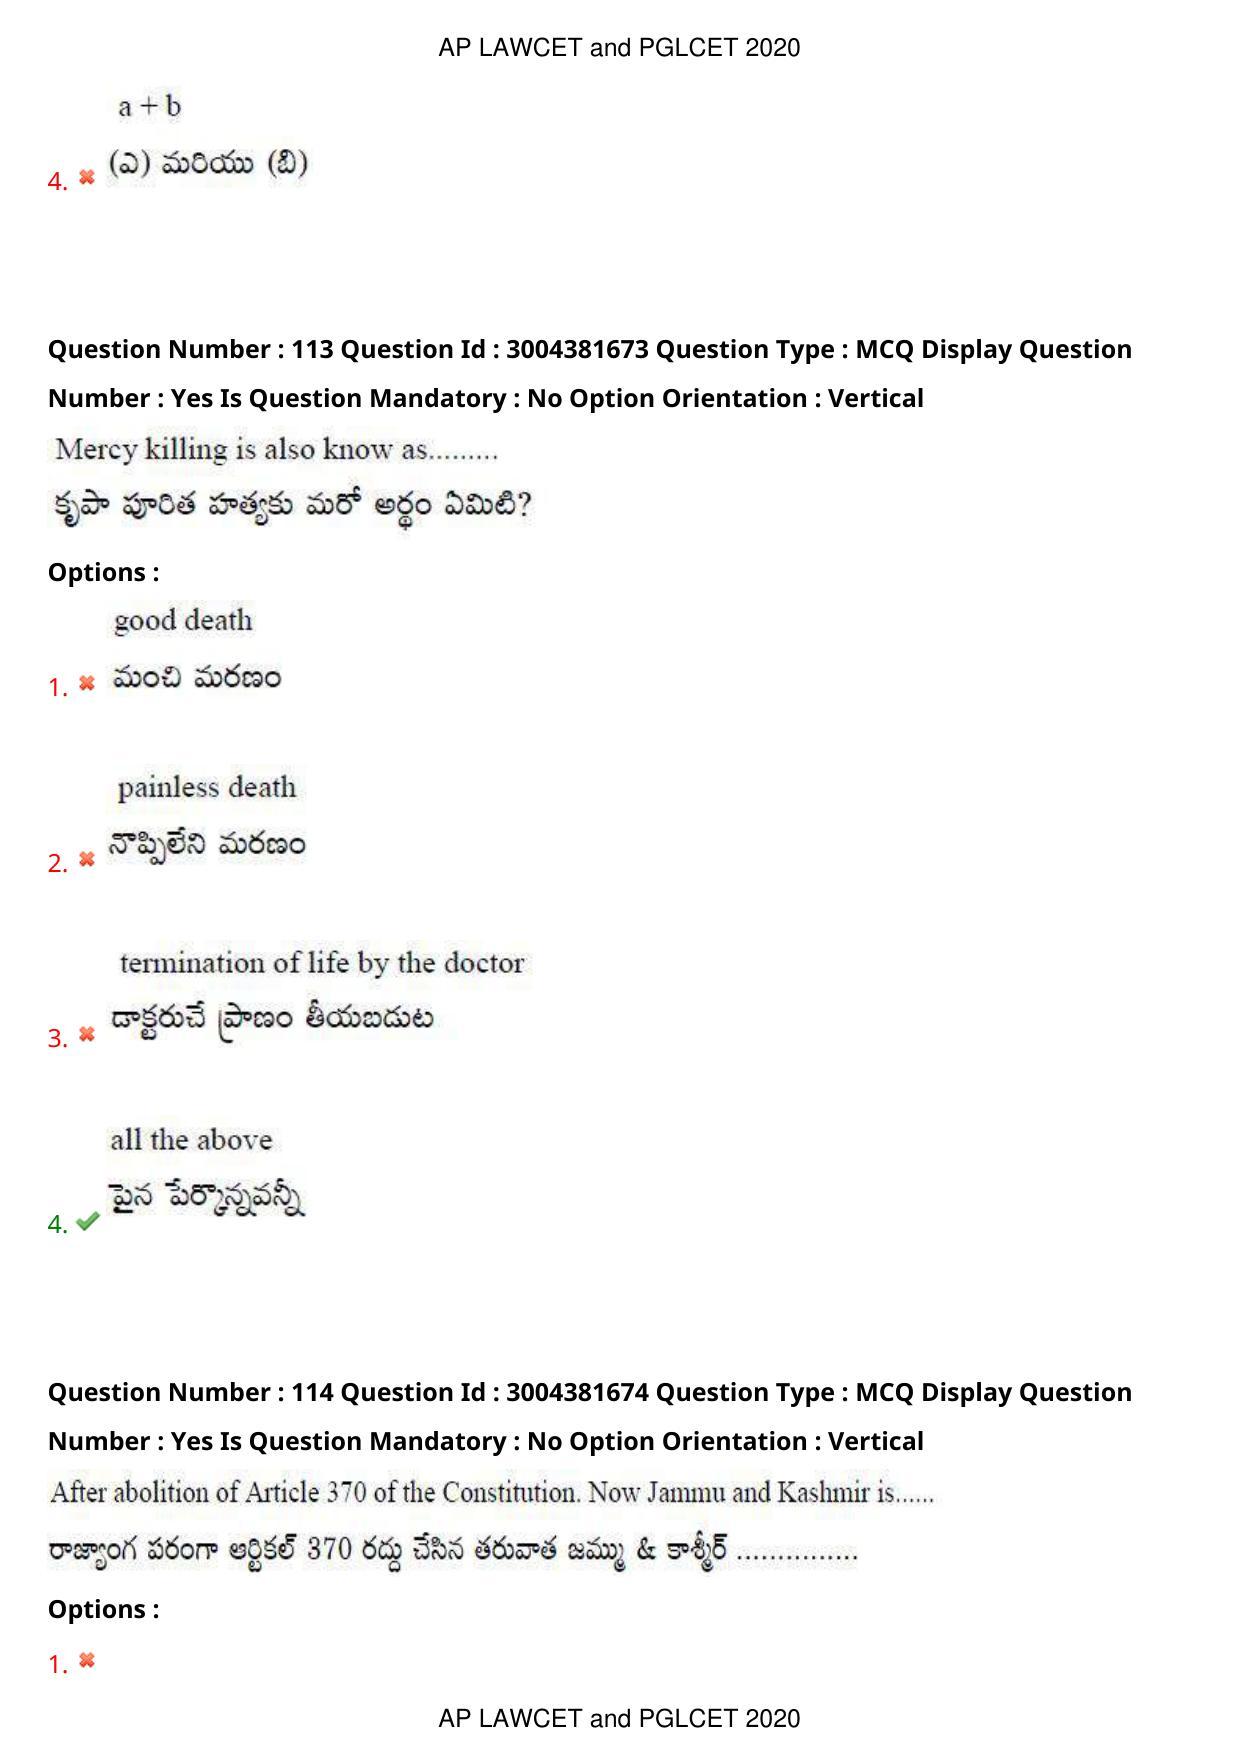 AP LAWCET 2020 - 5 Year LLB Question Paper With Keys - Page 74